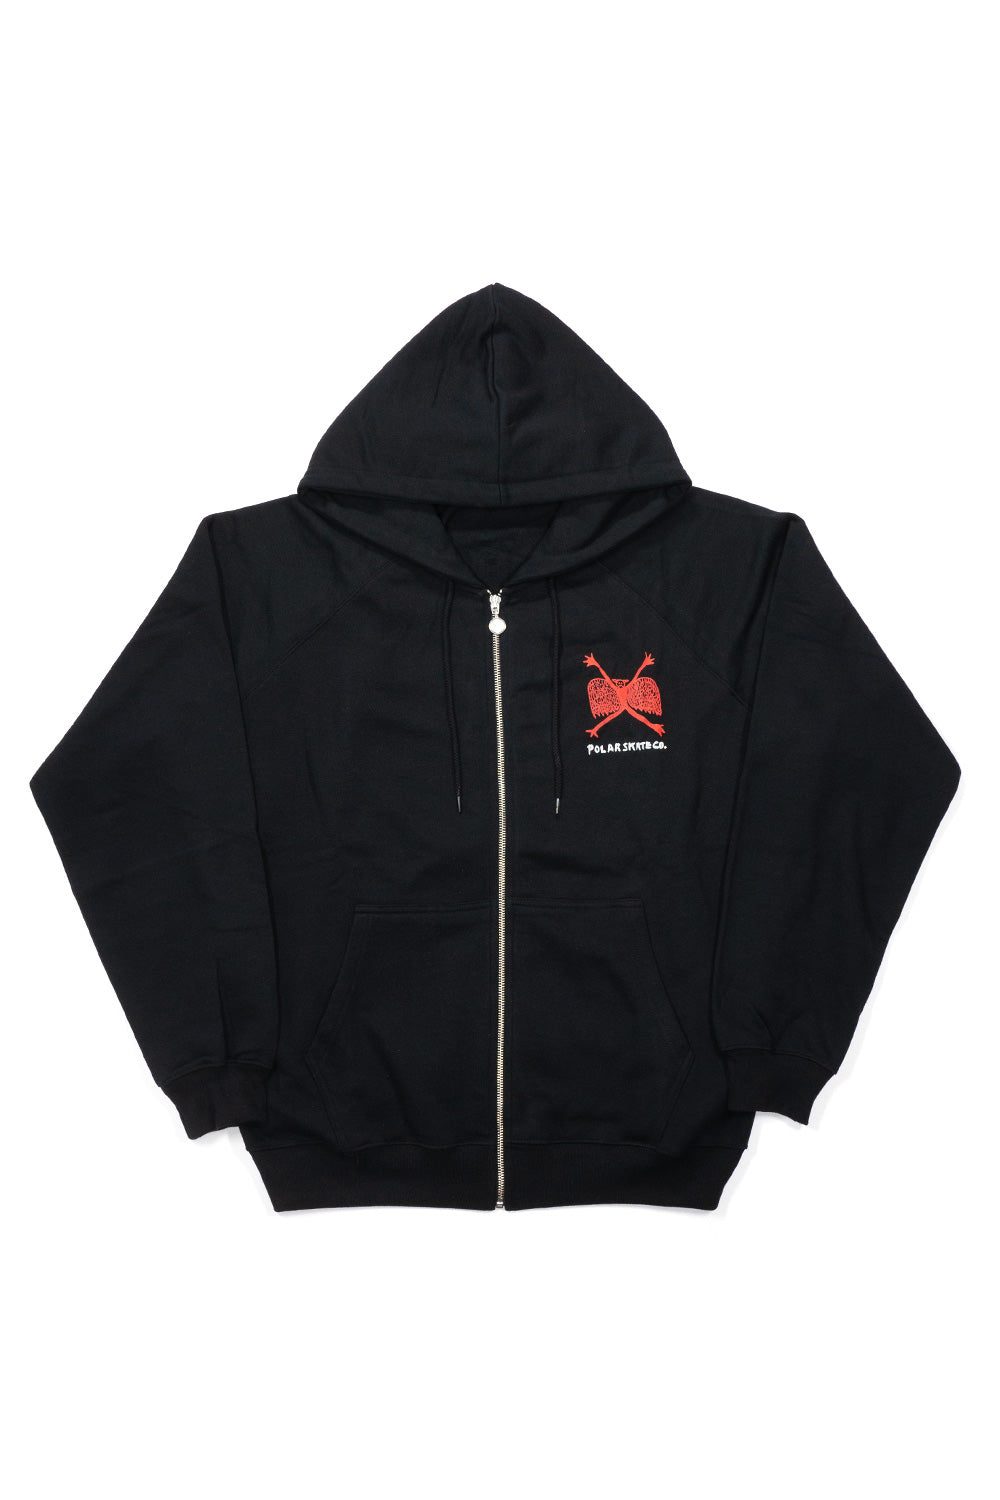 Polar Skate Co. Welcome To The New Age Zip Hoodie Black - BONKERS